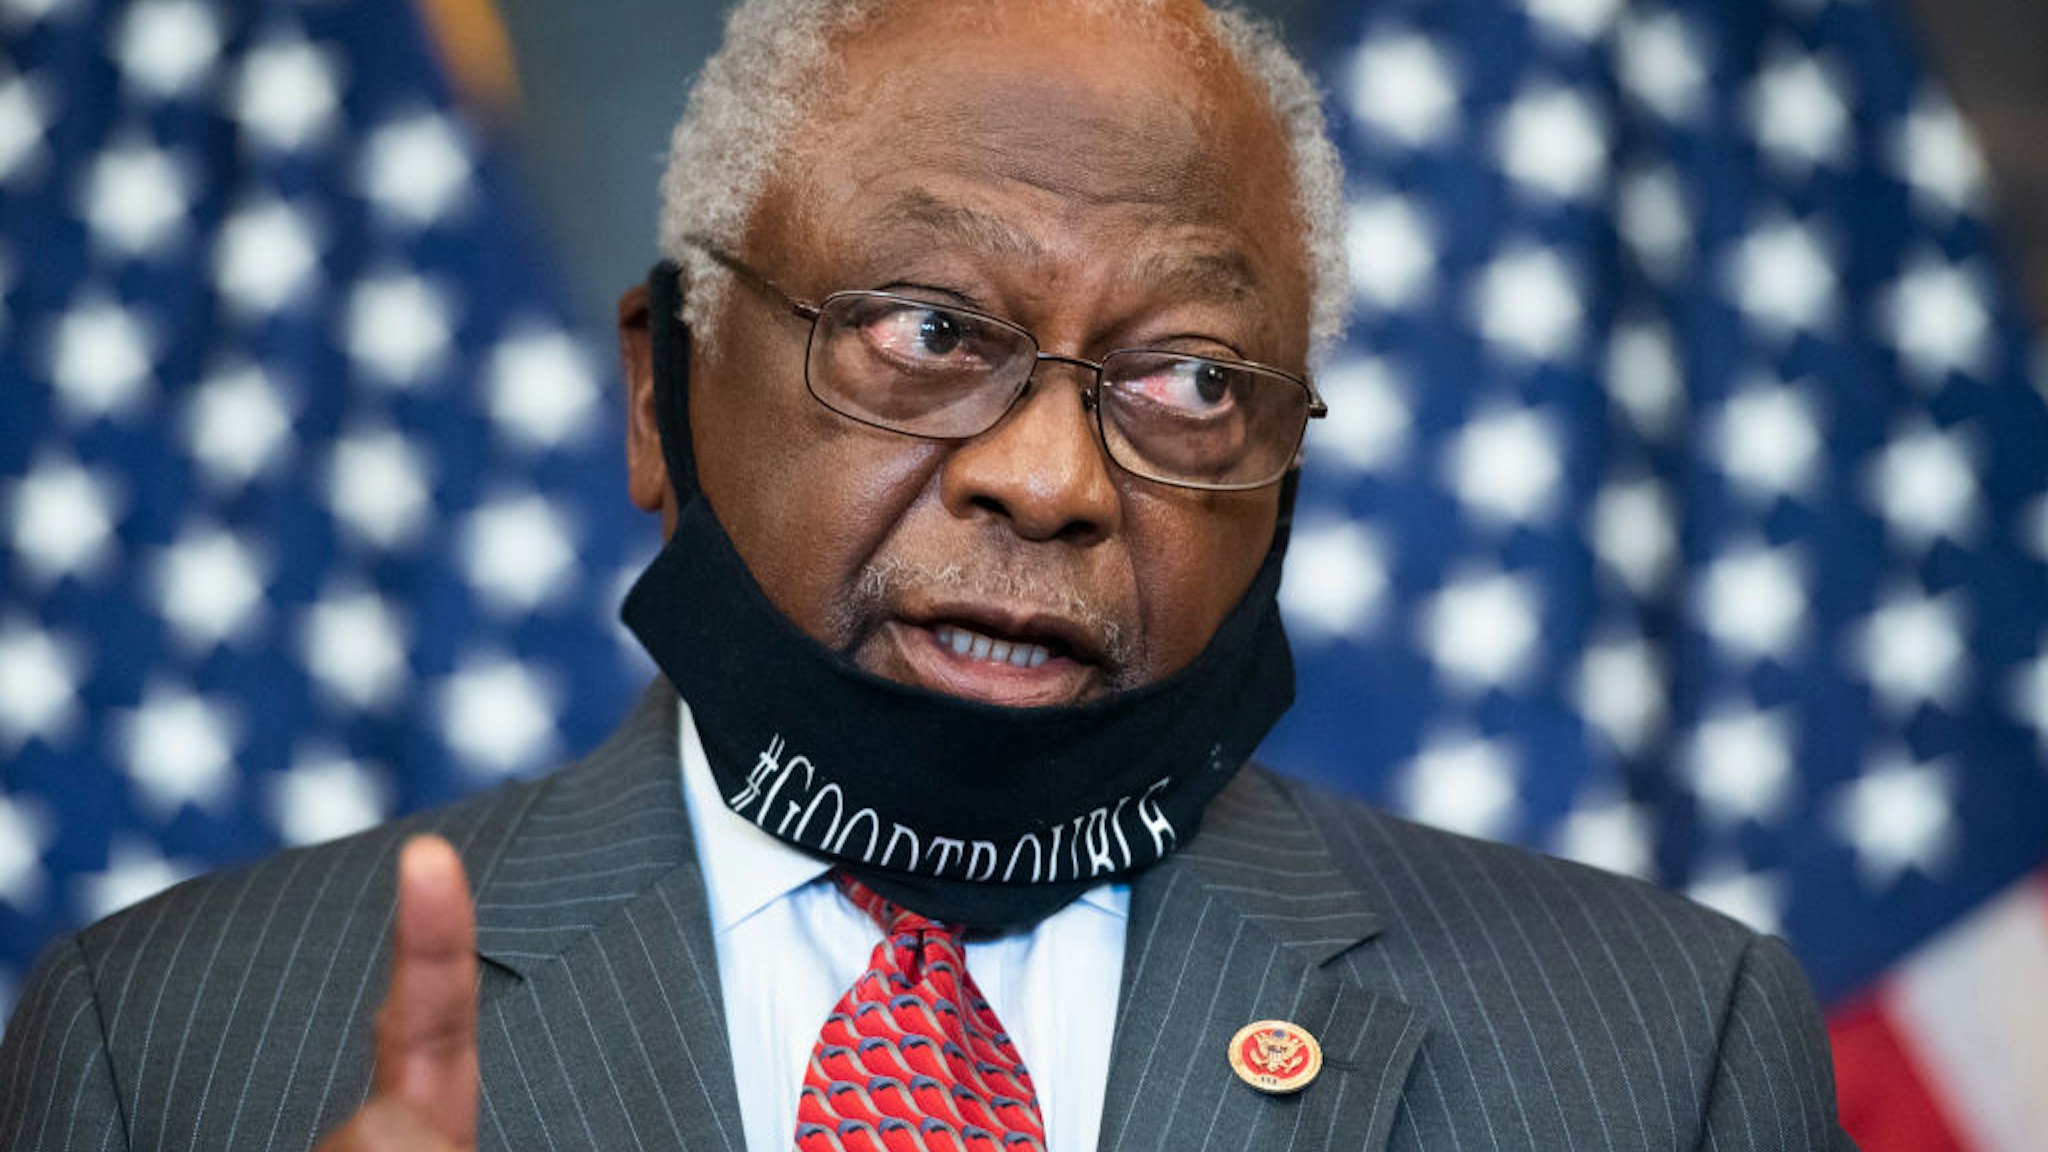 House Majority Whip Jim Clyburn, D-S.C., conducts a news conference in the Capitols Rayburn Room to call for covid-19 testing and tracing funds that are included in the Heroes Act on Thursday, September 17, 2020.